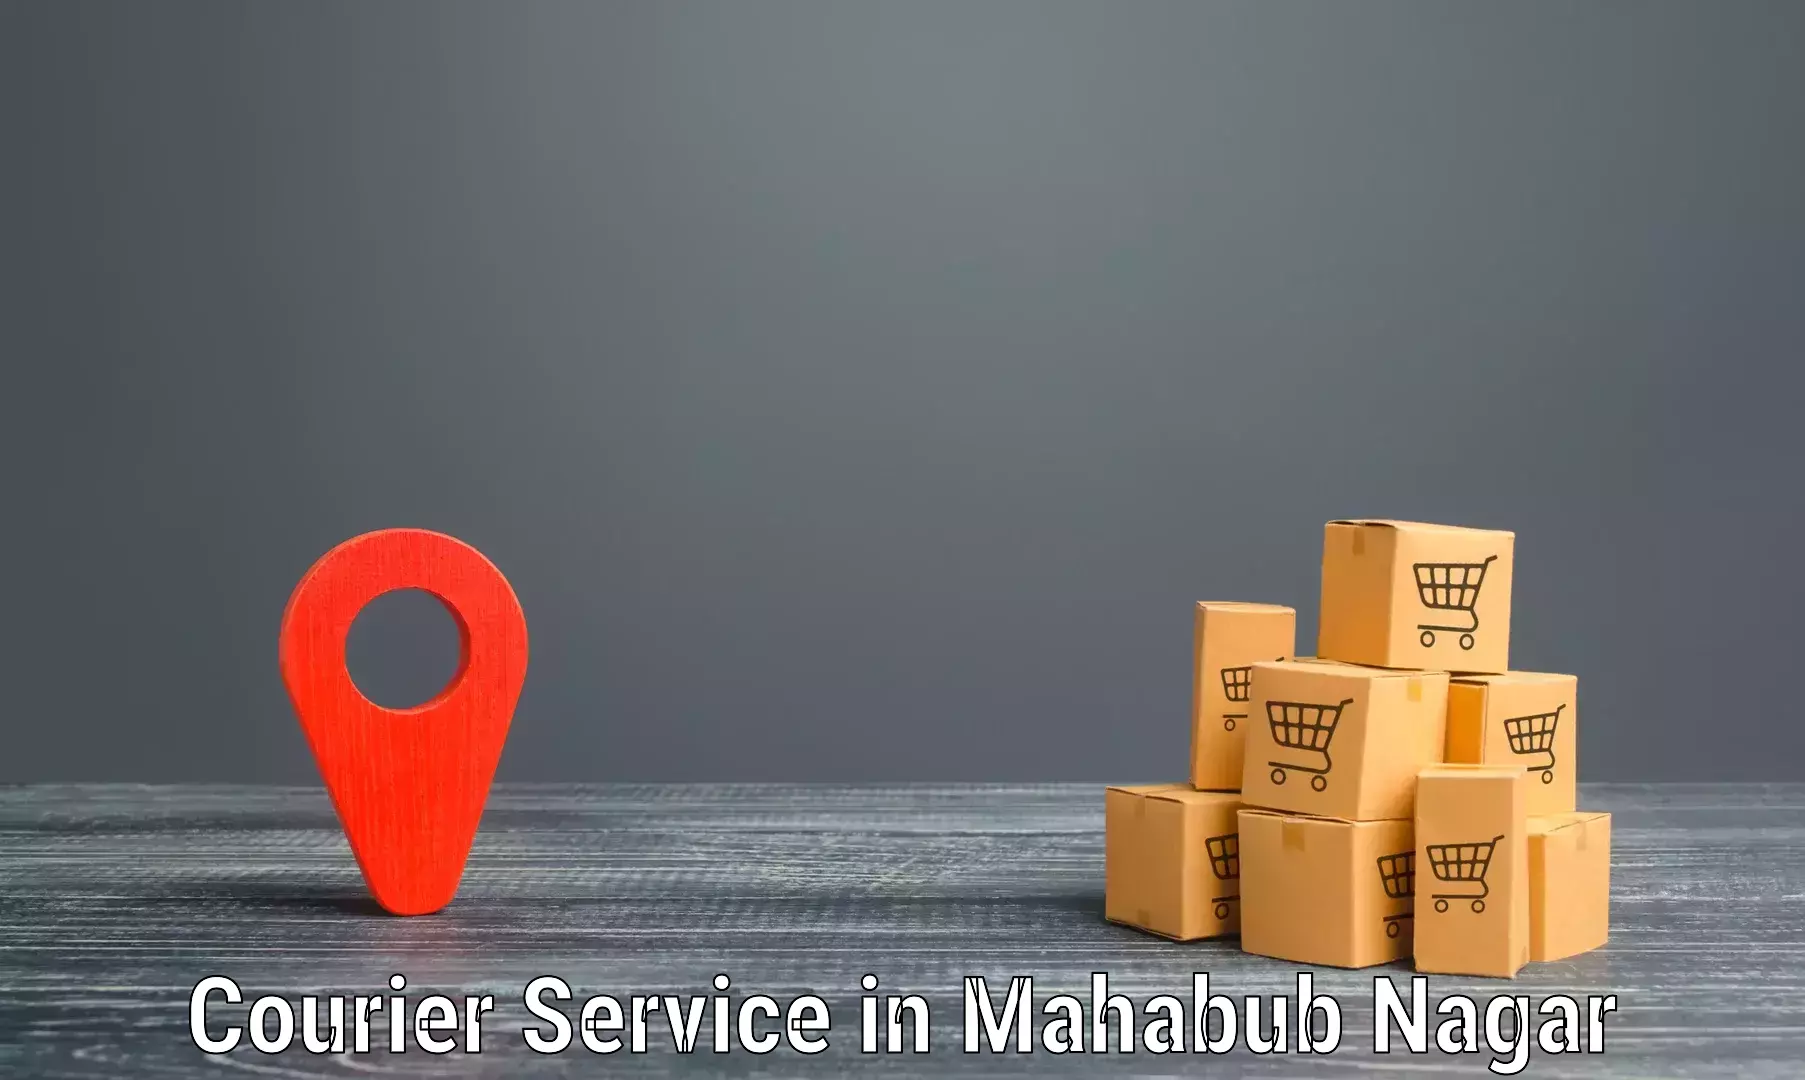 Scheduled delivery in Mahabub Nagar